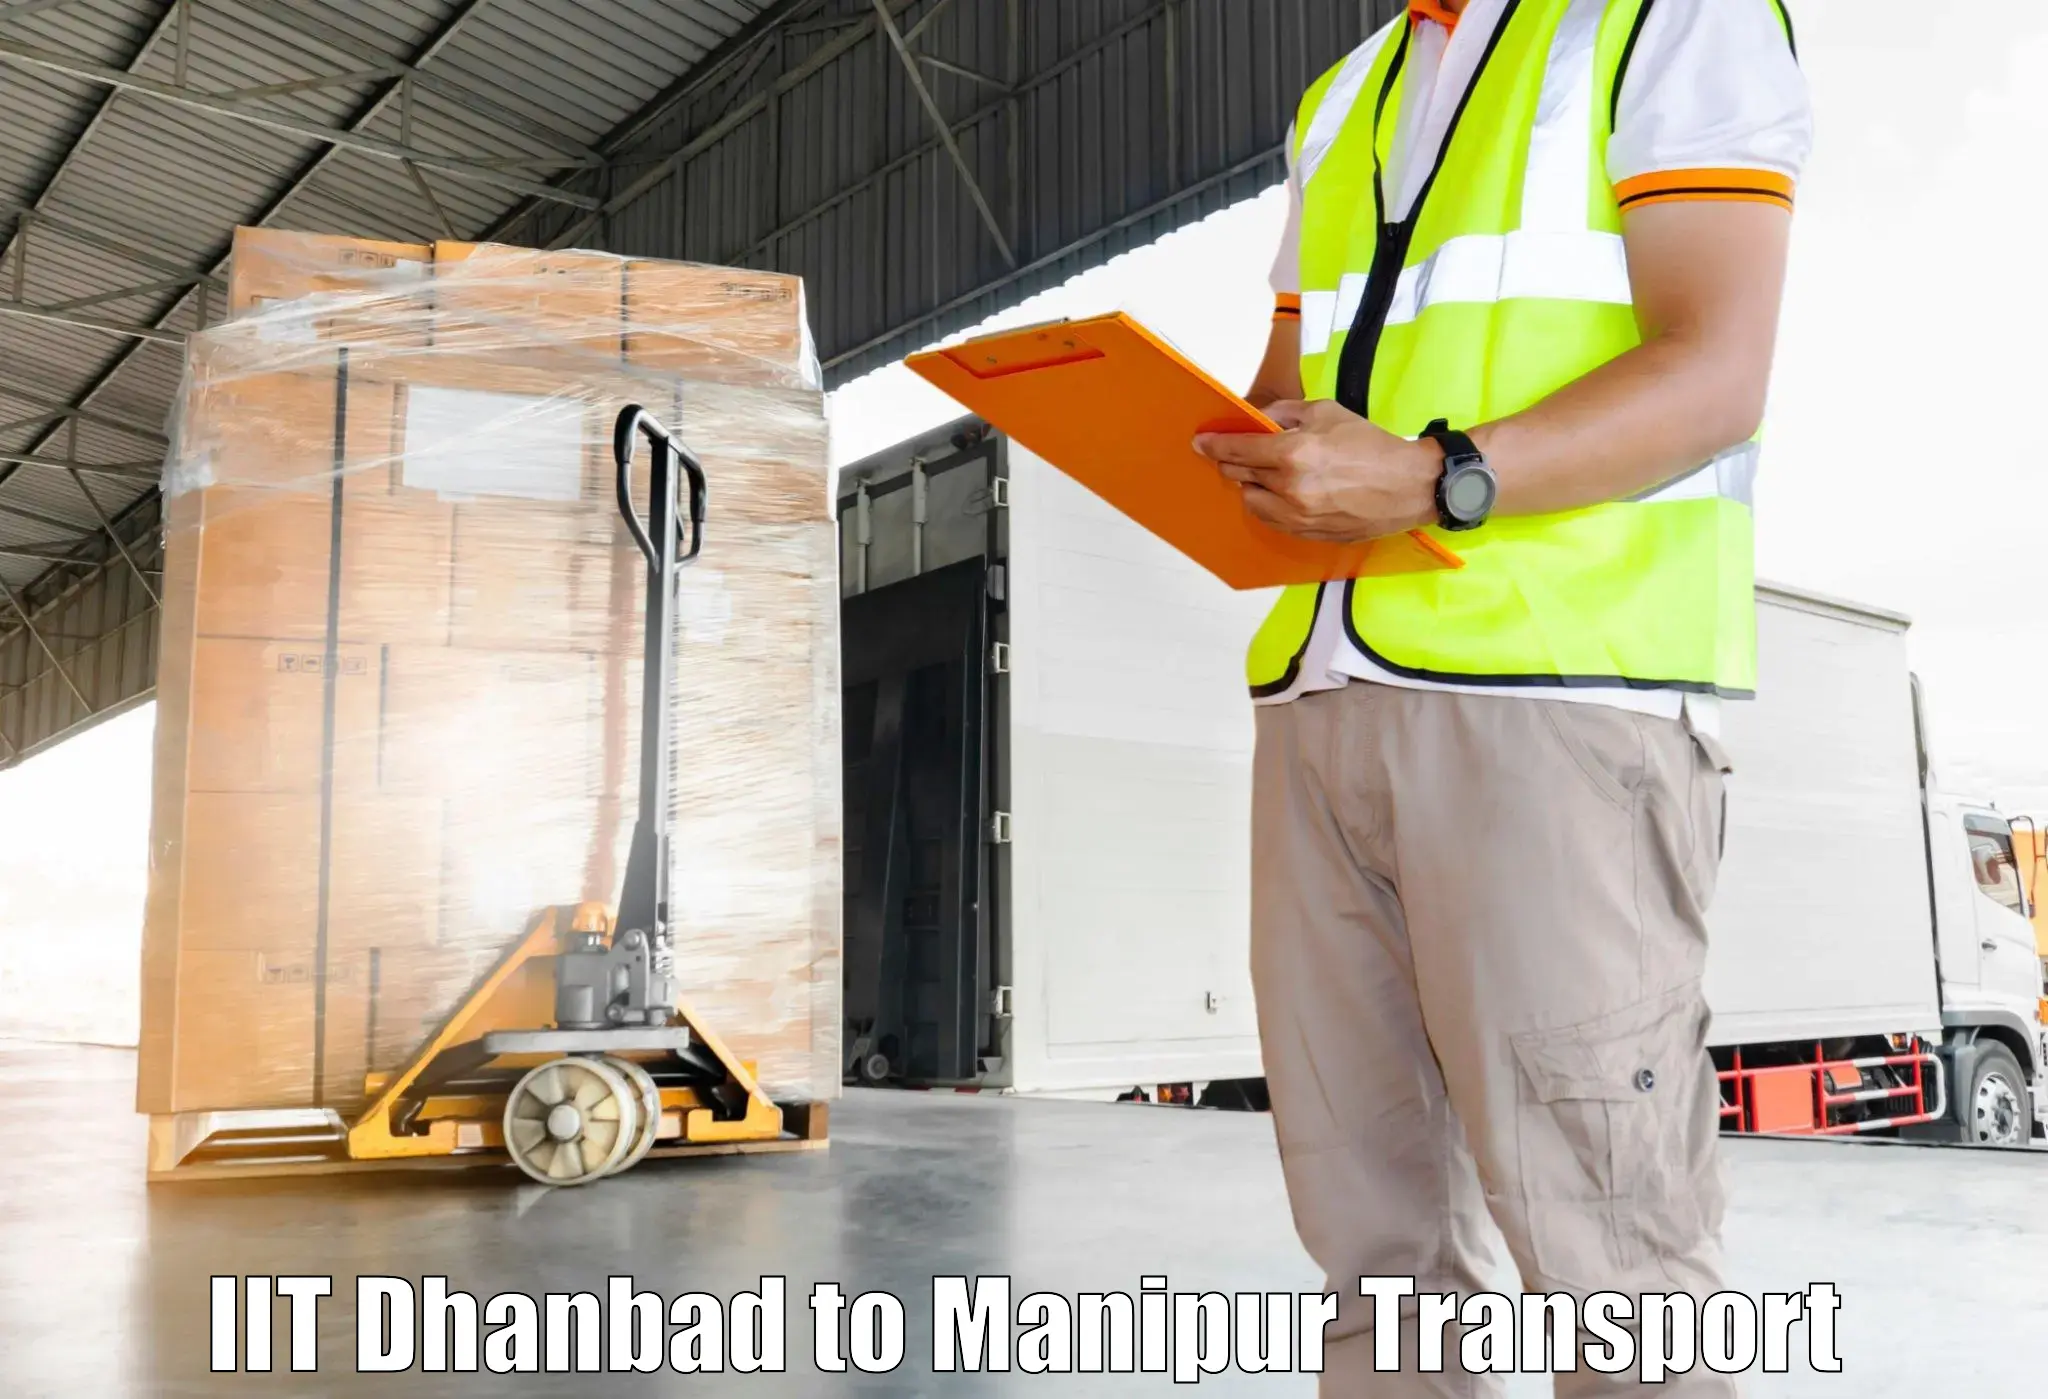 Container transport service IIT Dhanbad to Moirang